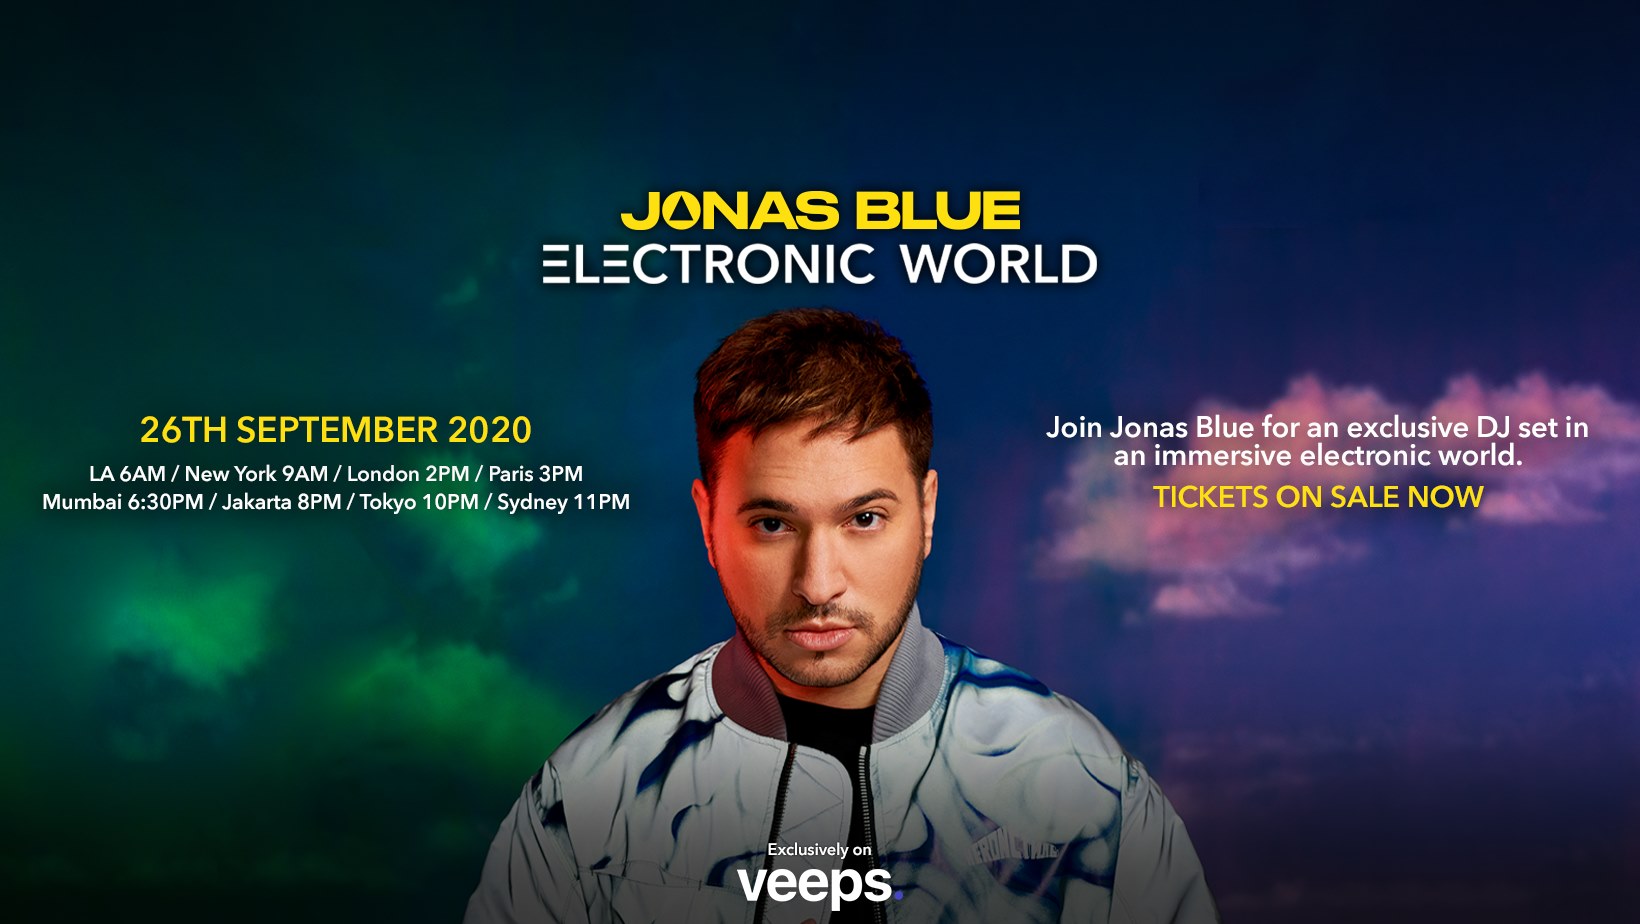 ‘Electronic World’ livestream by Jonas Blue exclusively on Veeps